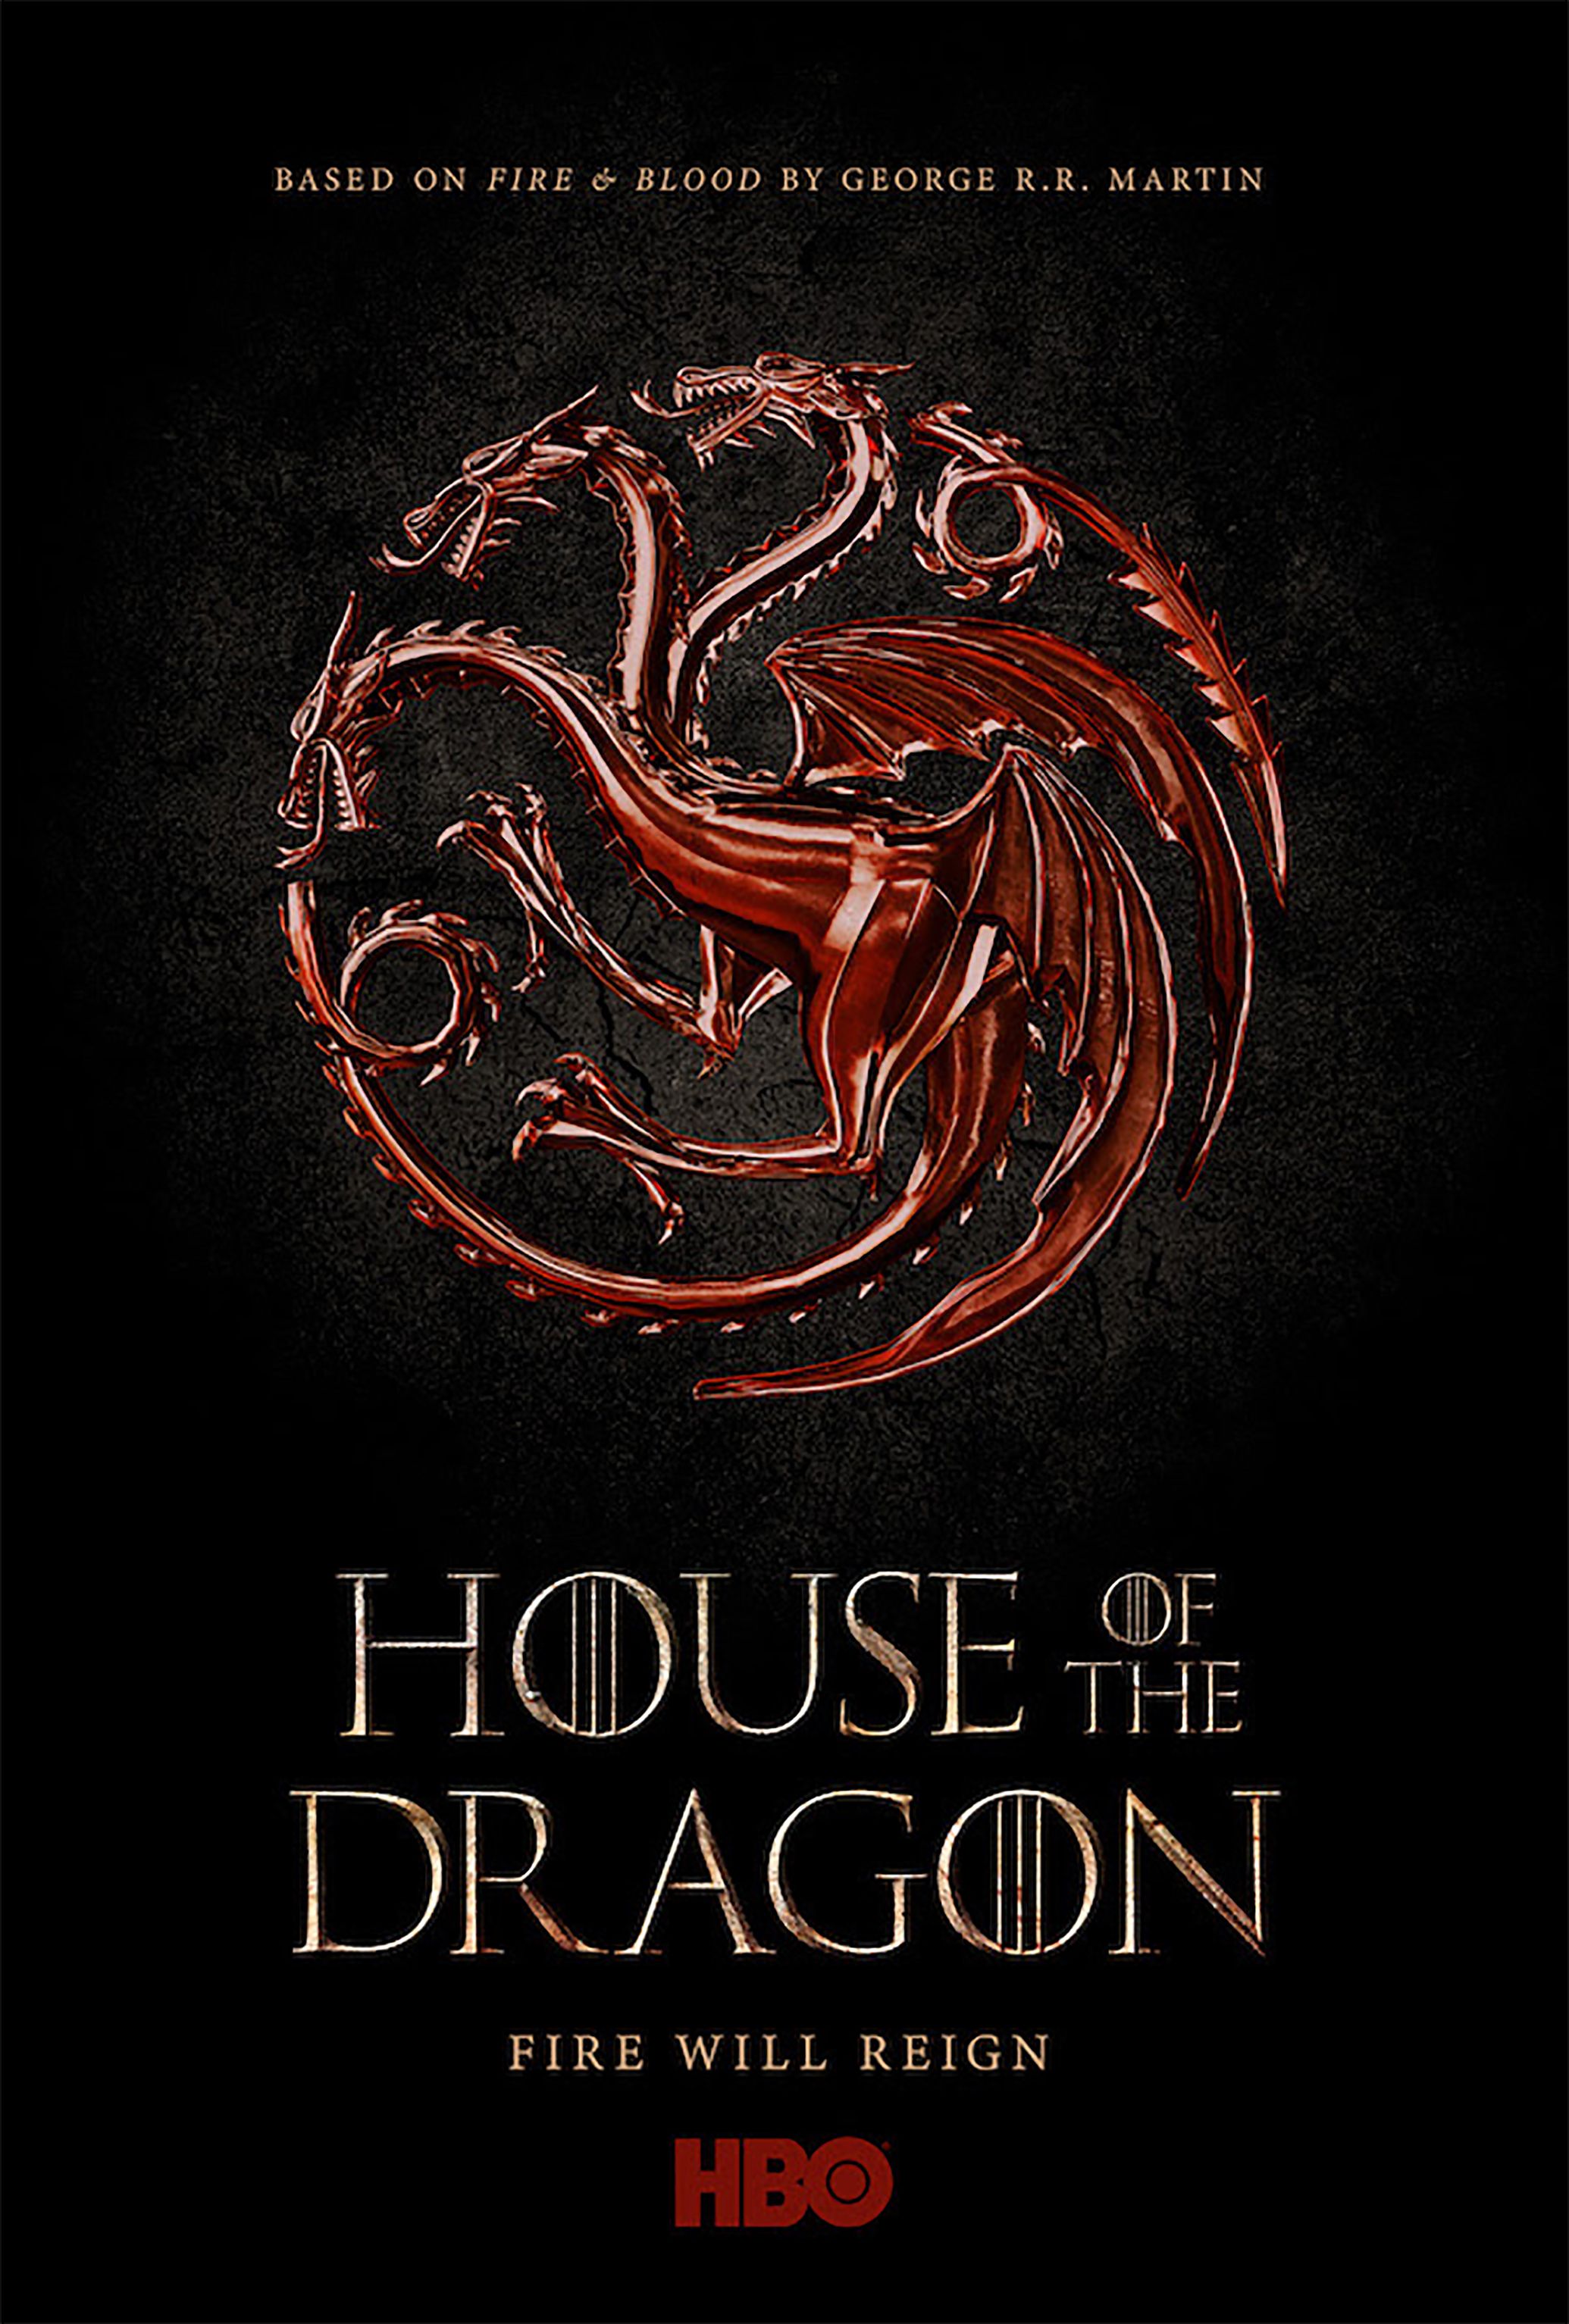 House of the Dragon Poster from HBO